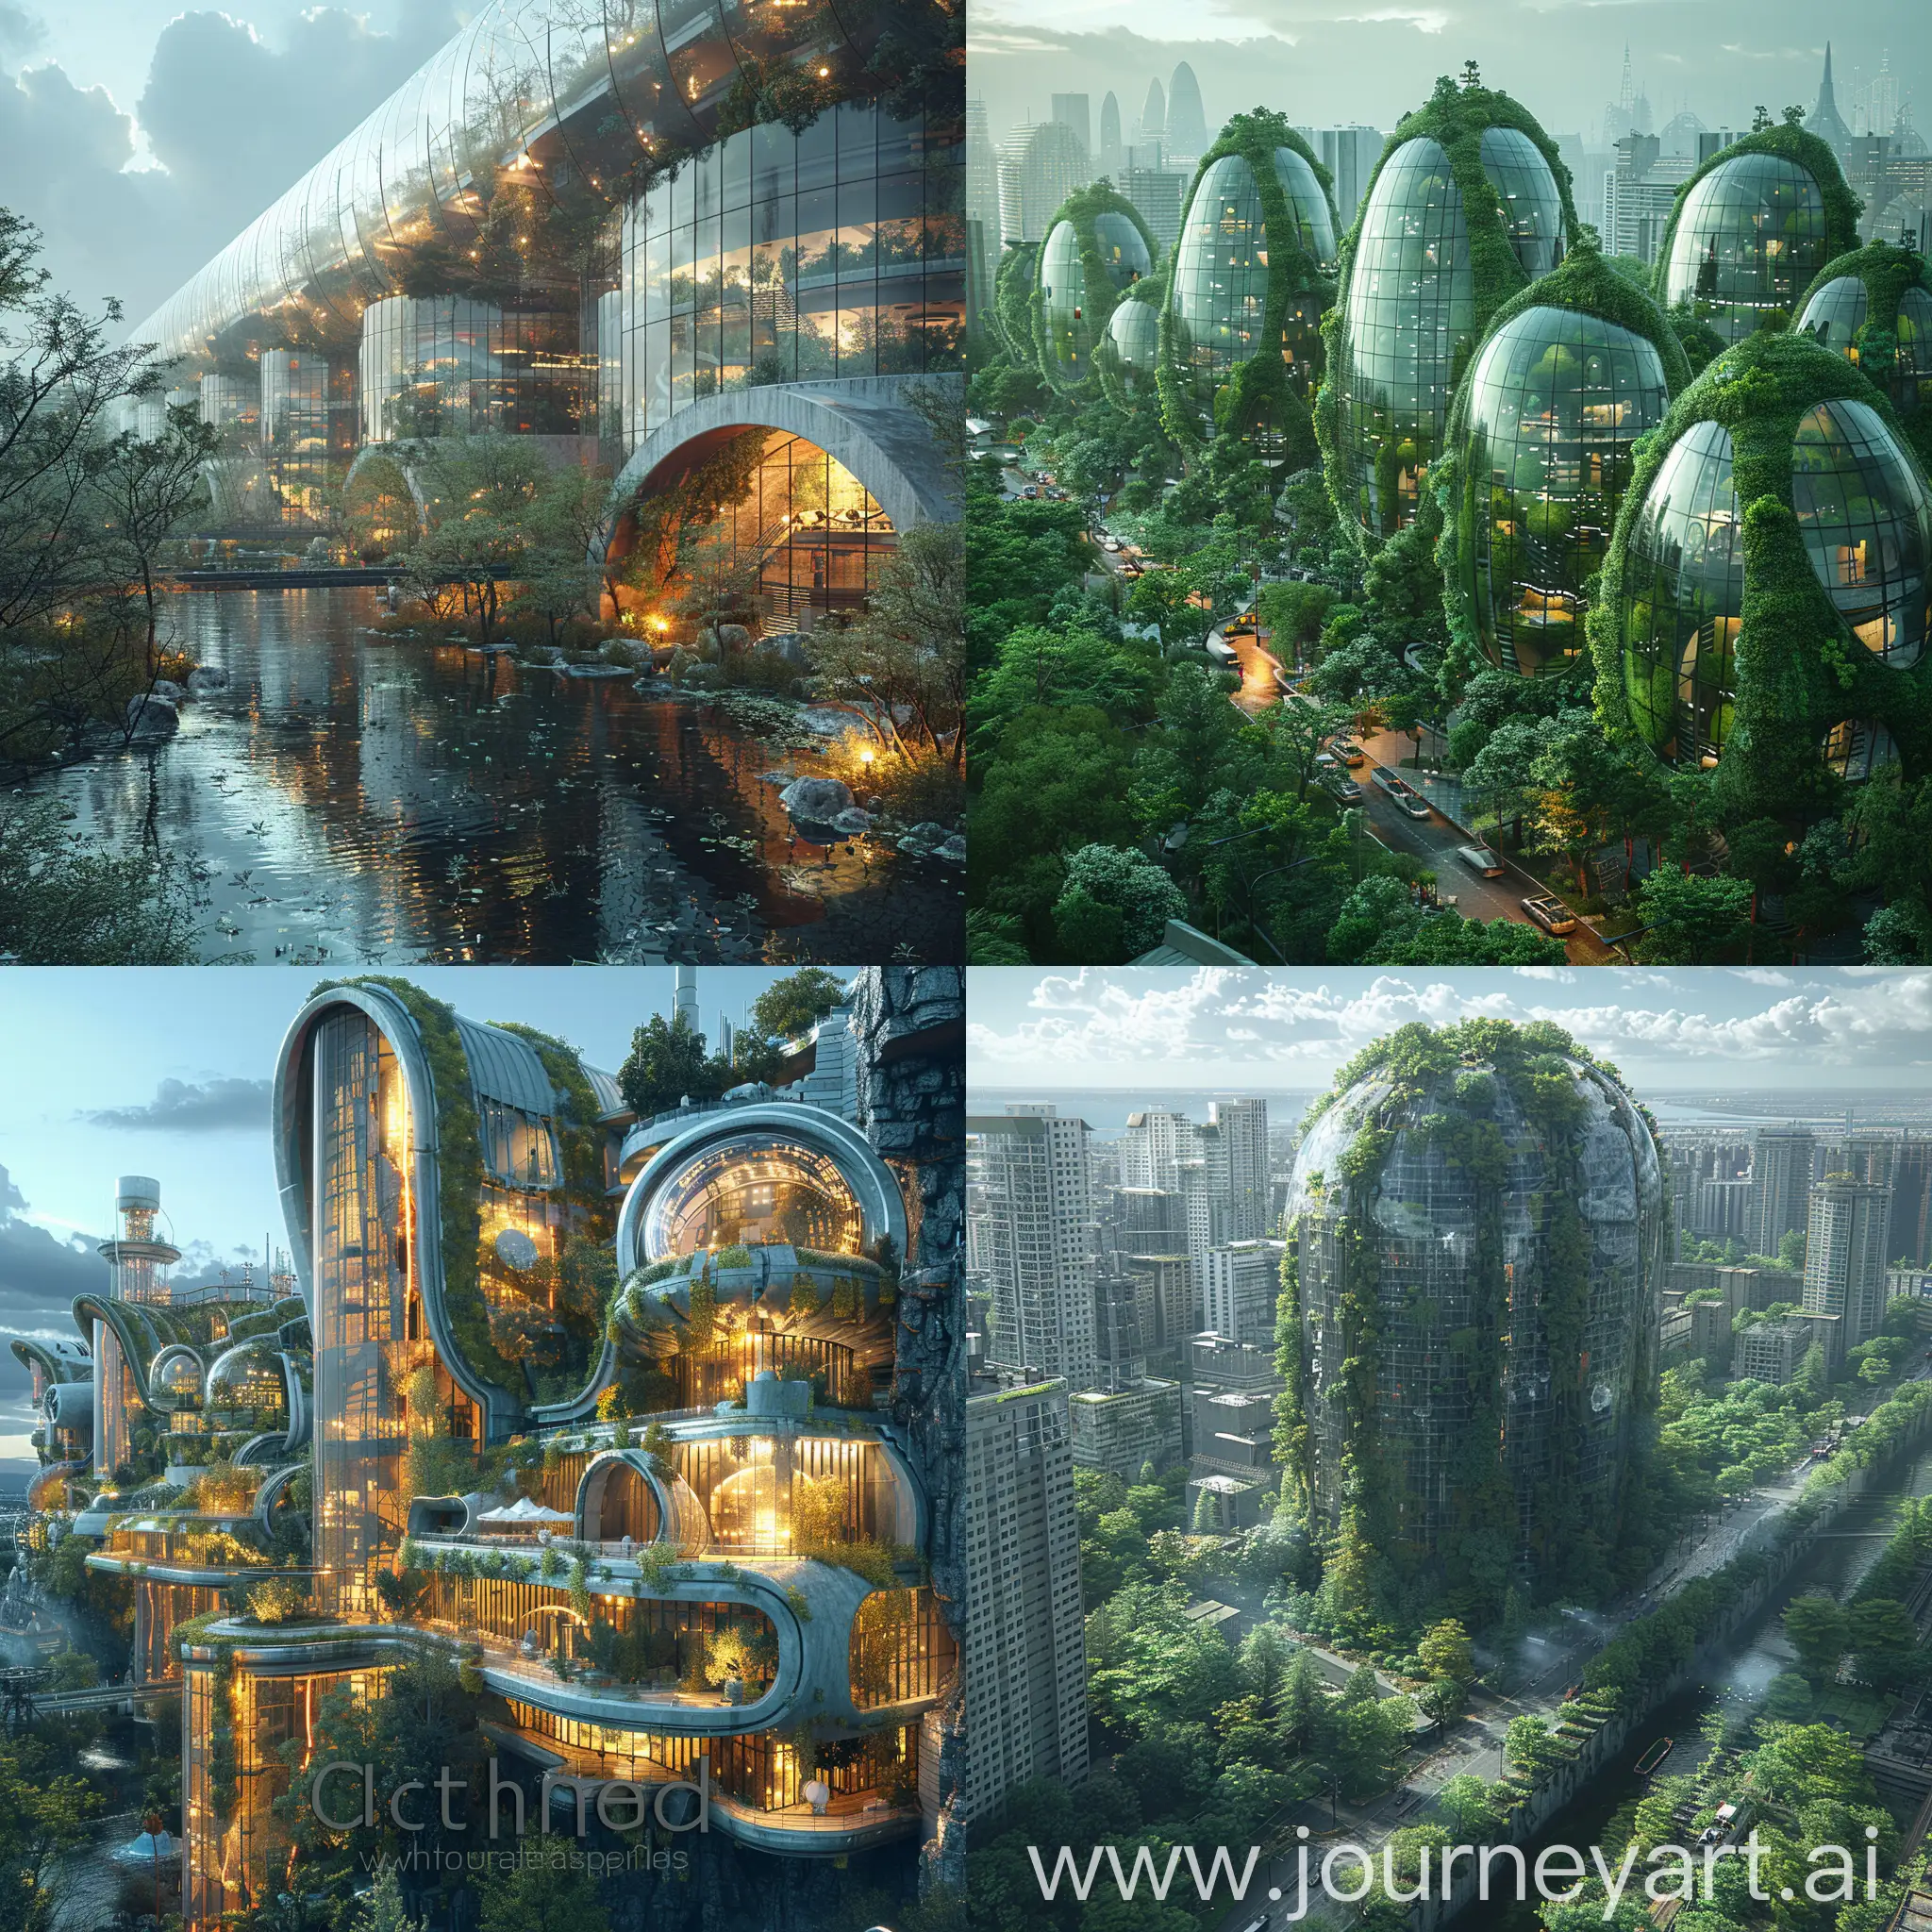 Futuristic-Chernobyl-Sustainable-Cityscape-with-Green-Roofs-and-Vertical-Farms